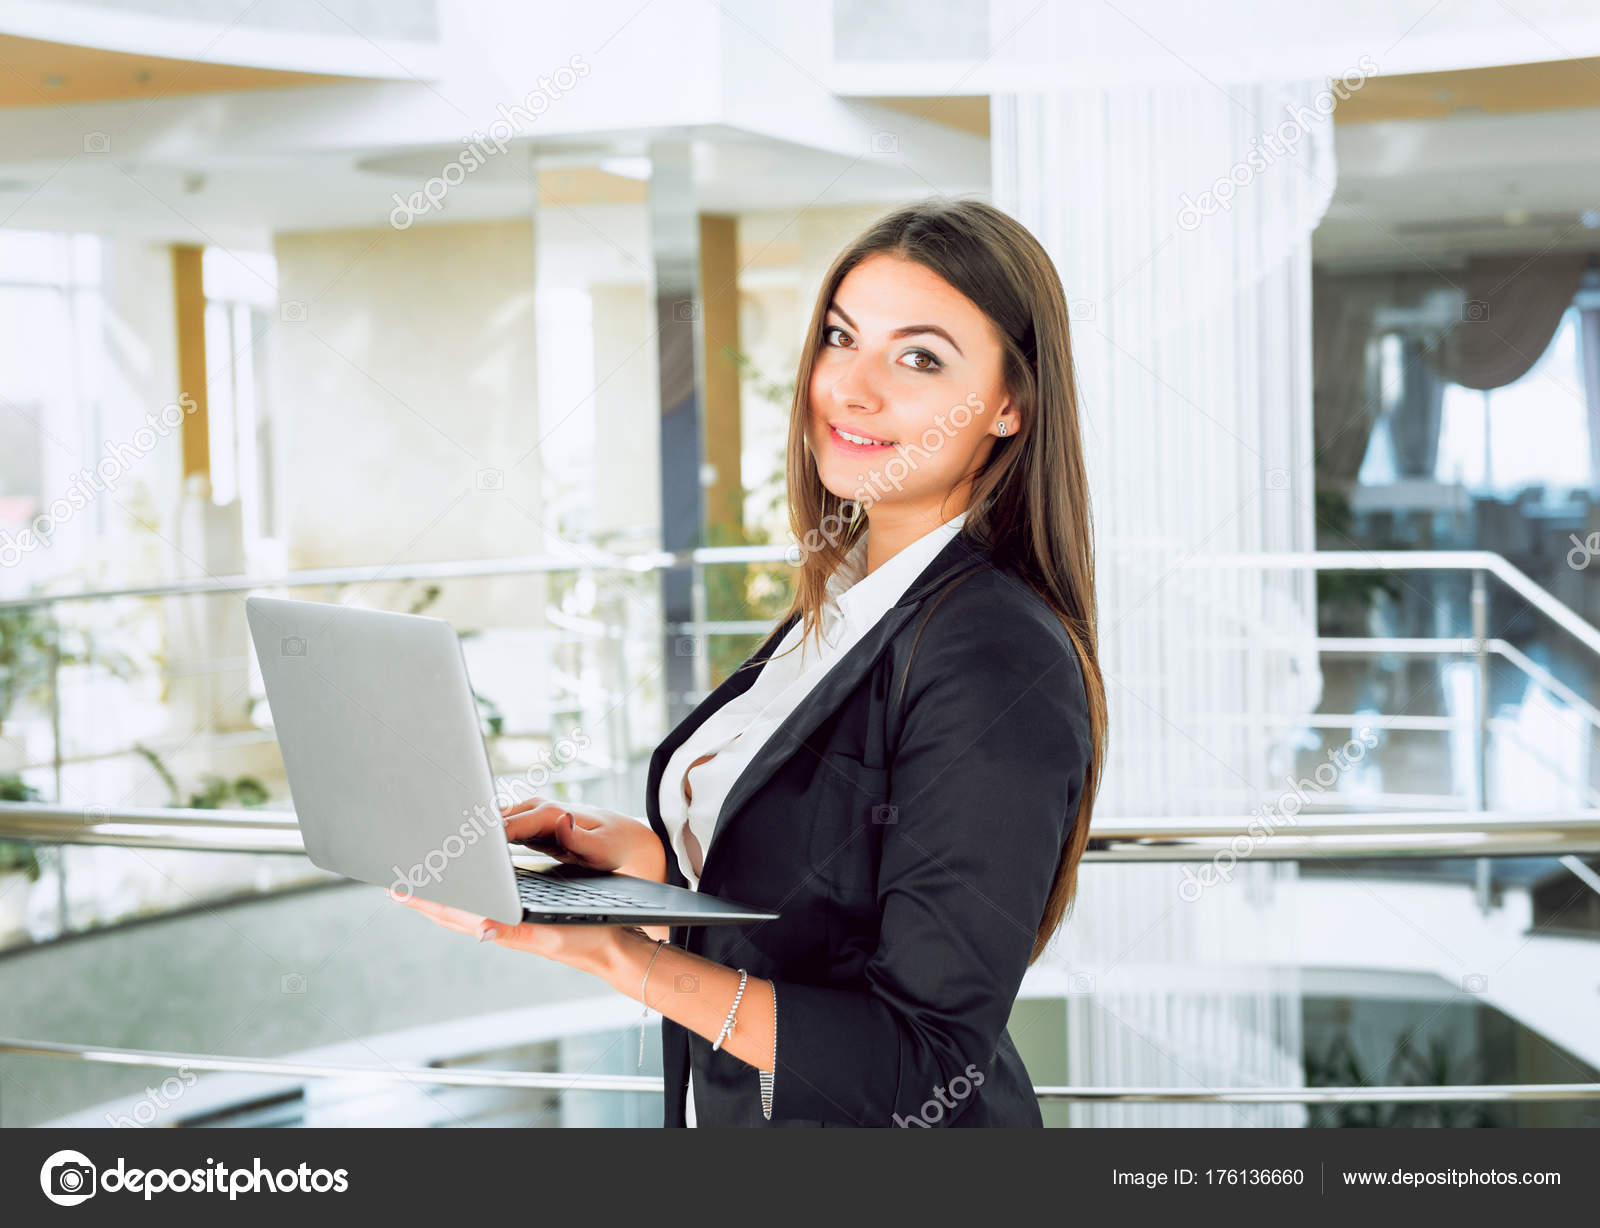 Business Woman Office Worker Stock Photo by ©Romaset 176136660